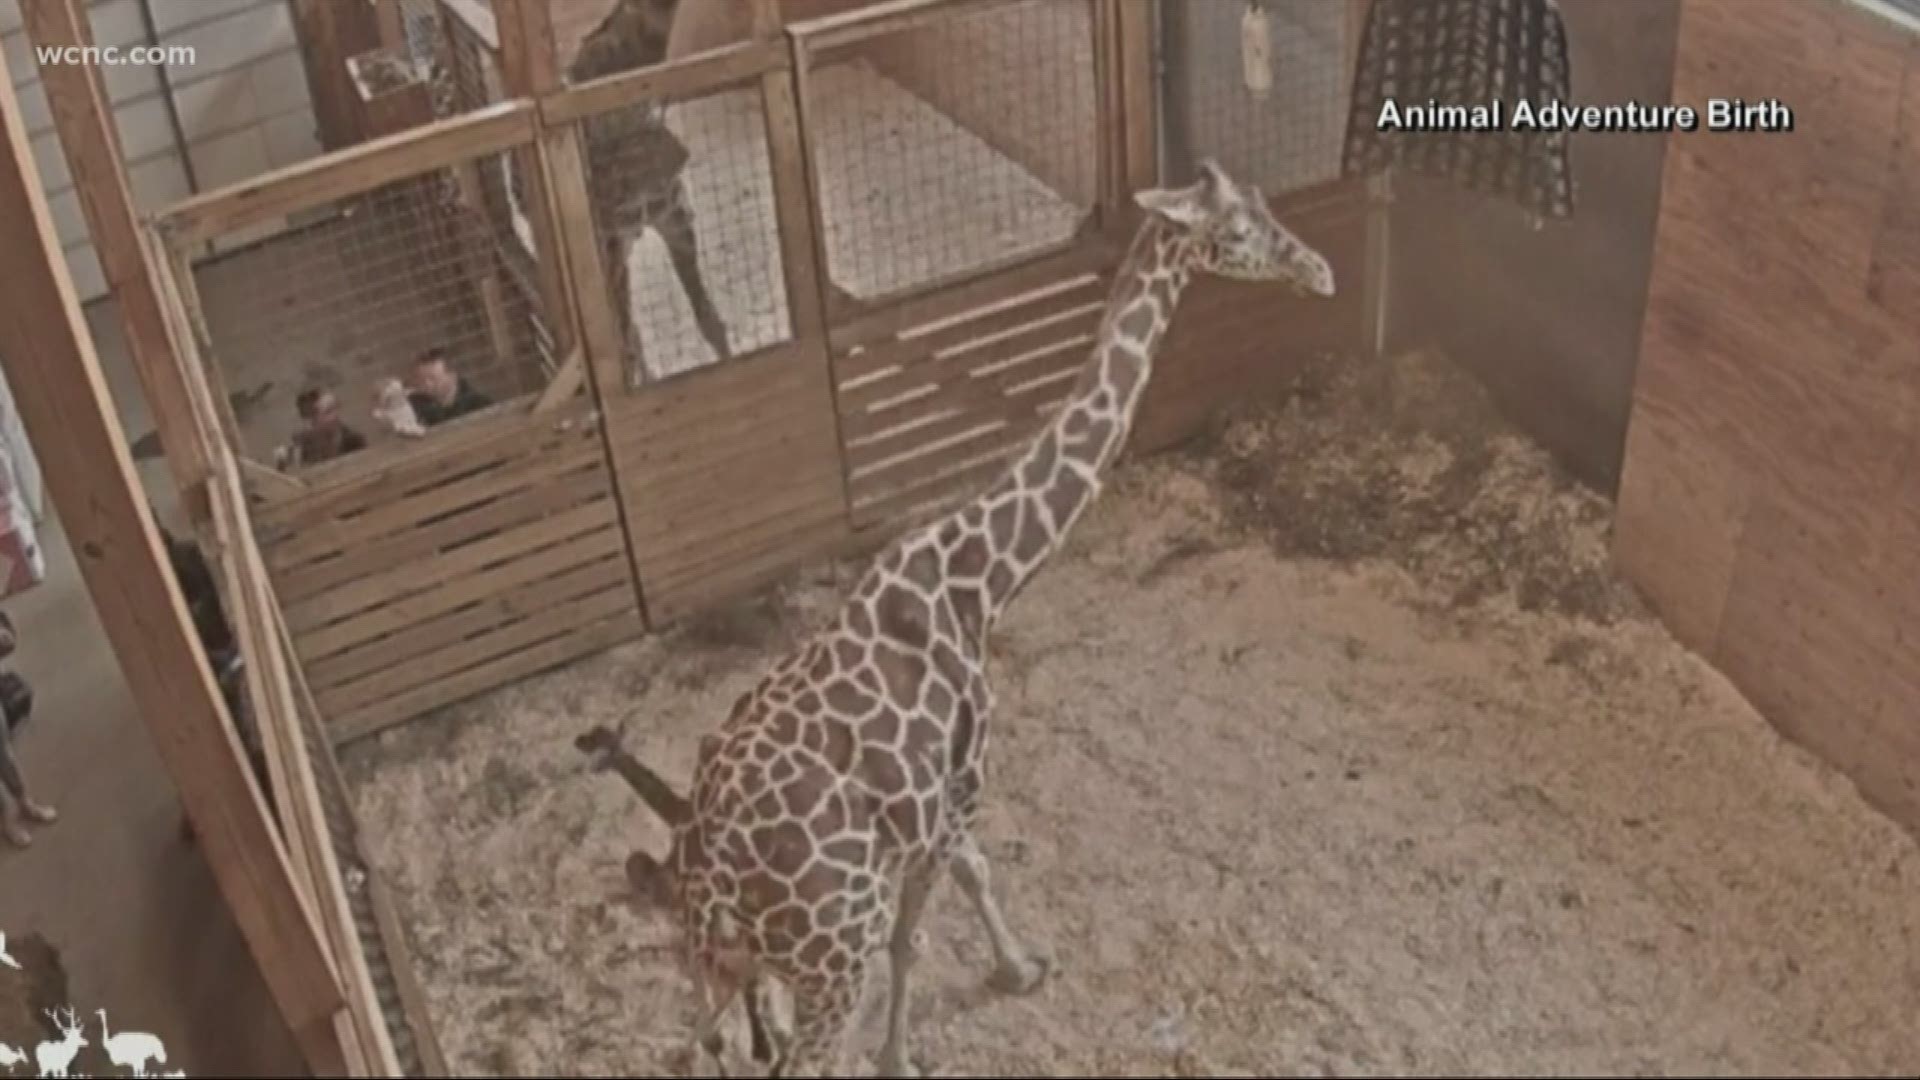 After having five calves and becoming a social media star, Animal Adventure Park in New York announced that April the Giraffe will start taking birth control and will no longer be part of the zoo's breeding program.